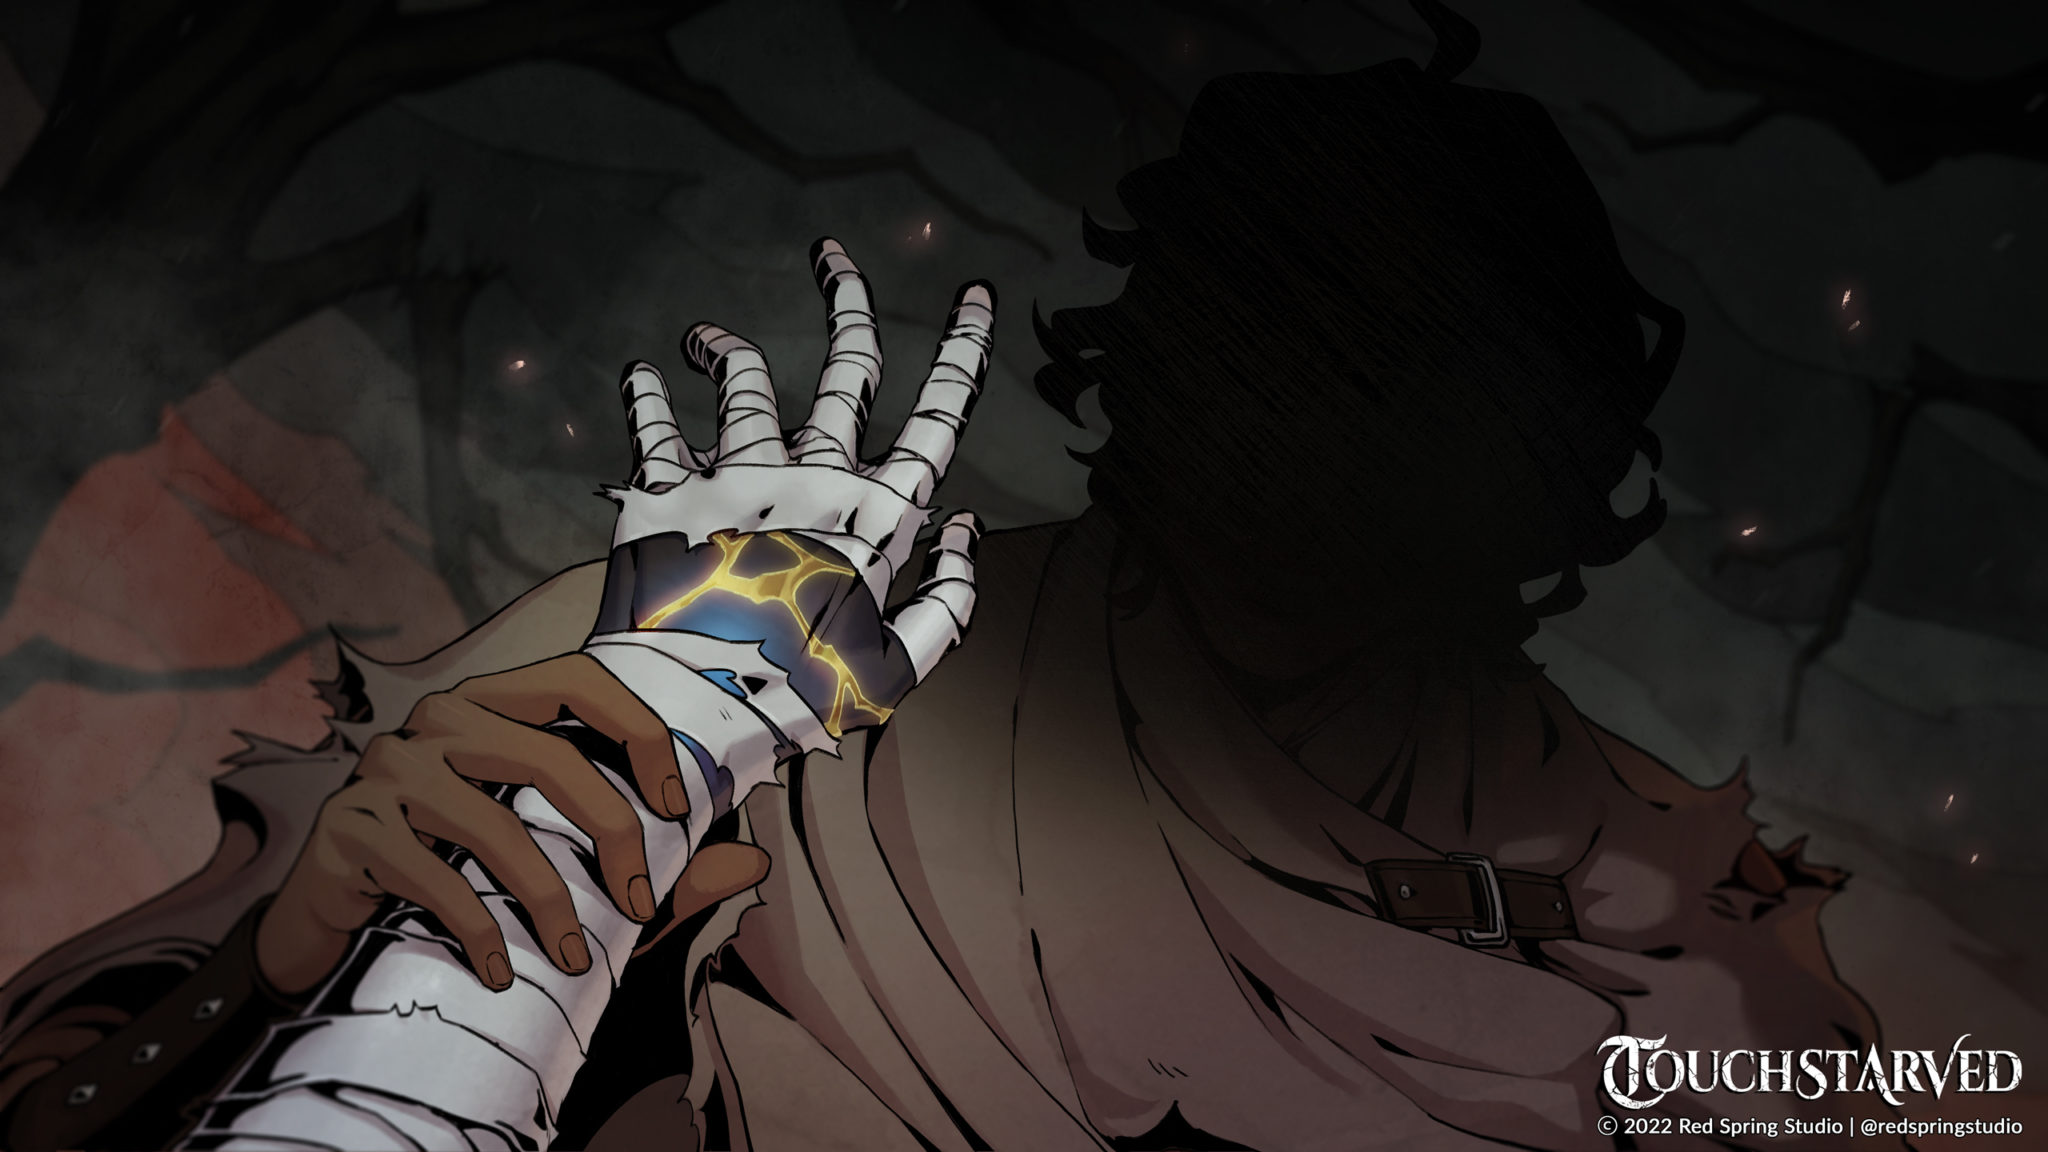 The Main Character's unnaturally colored hand with veins of gold is visible between ripped bandages